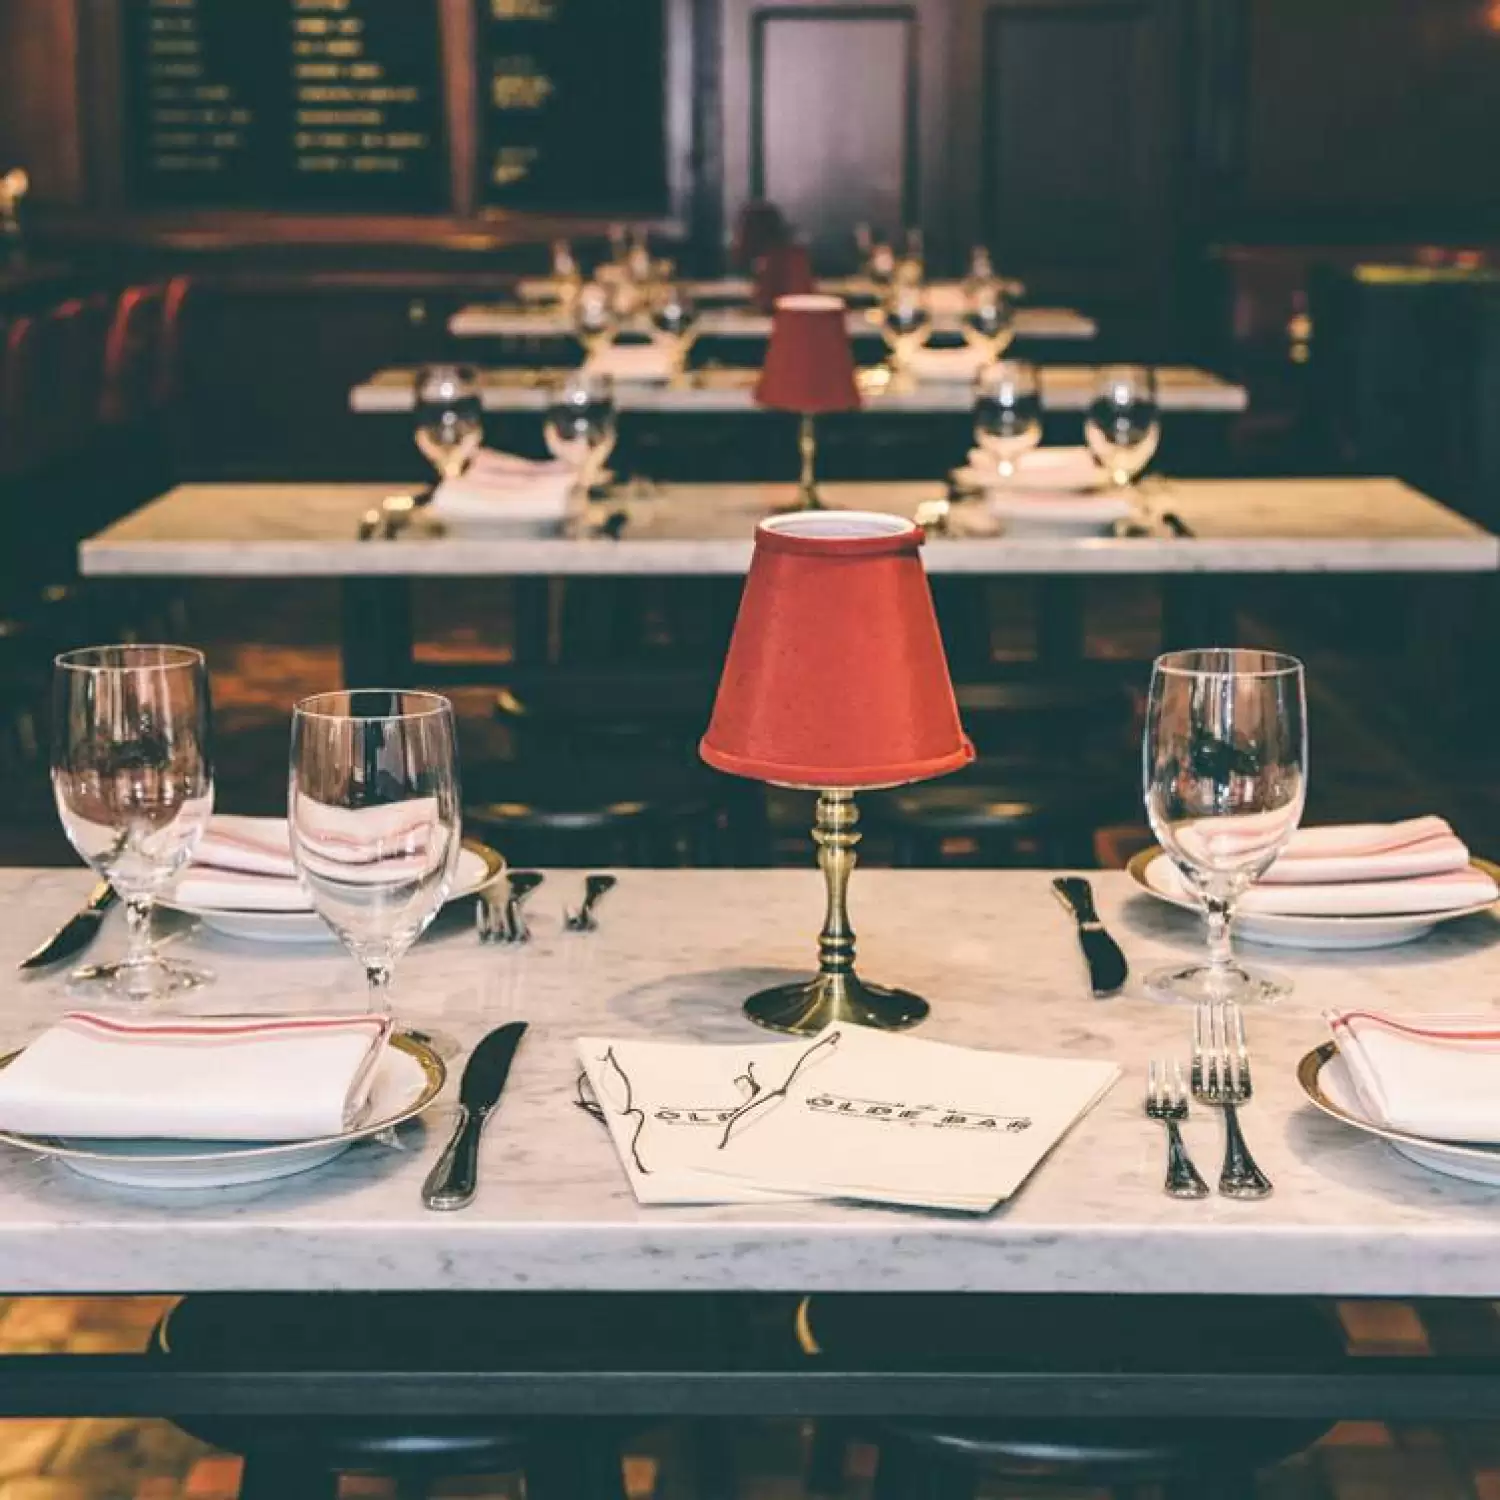 OpenTable gives restaurants a new tool to combat flaky guests